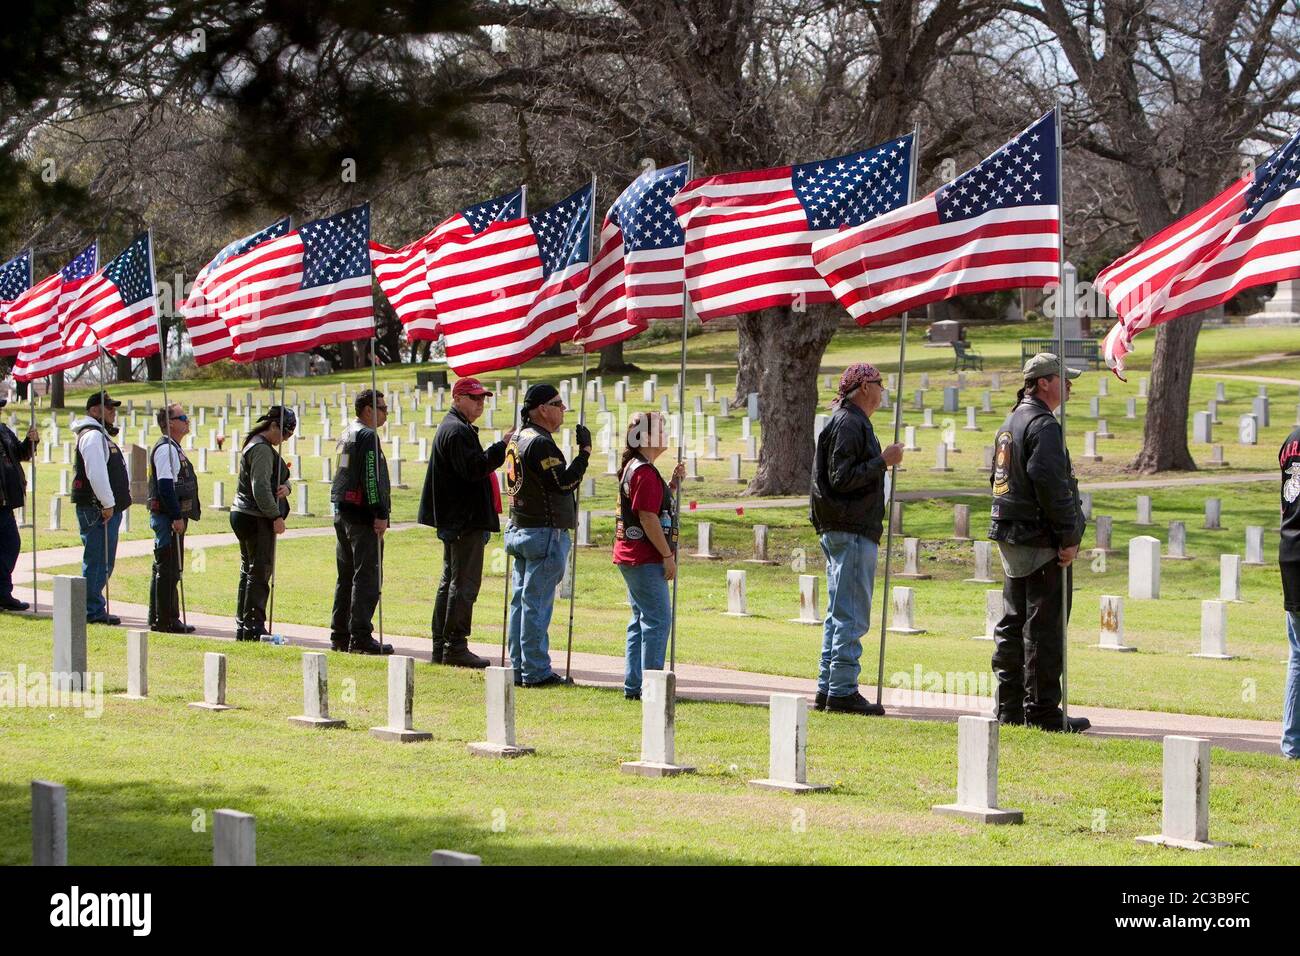 Austin Texas USA, February 12, 2013: Military veterans carrying American flags participate in the funeral service for former Navy SEAL Chris Kyle at the Texas State Cemetery. Kyle served four tours of duty as a sniper during the Iraq war, then wrote a popular book about his experiences there. He was fatally shot by a fellow Iraq war veteran at a gun range in Glen Rose, Texas on February 2. ©Marjorie Kamys Cotera/Daemmrich Photography Stock Photo